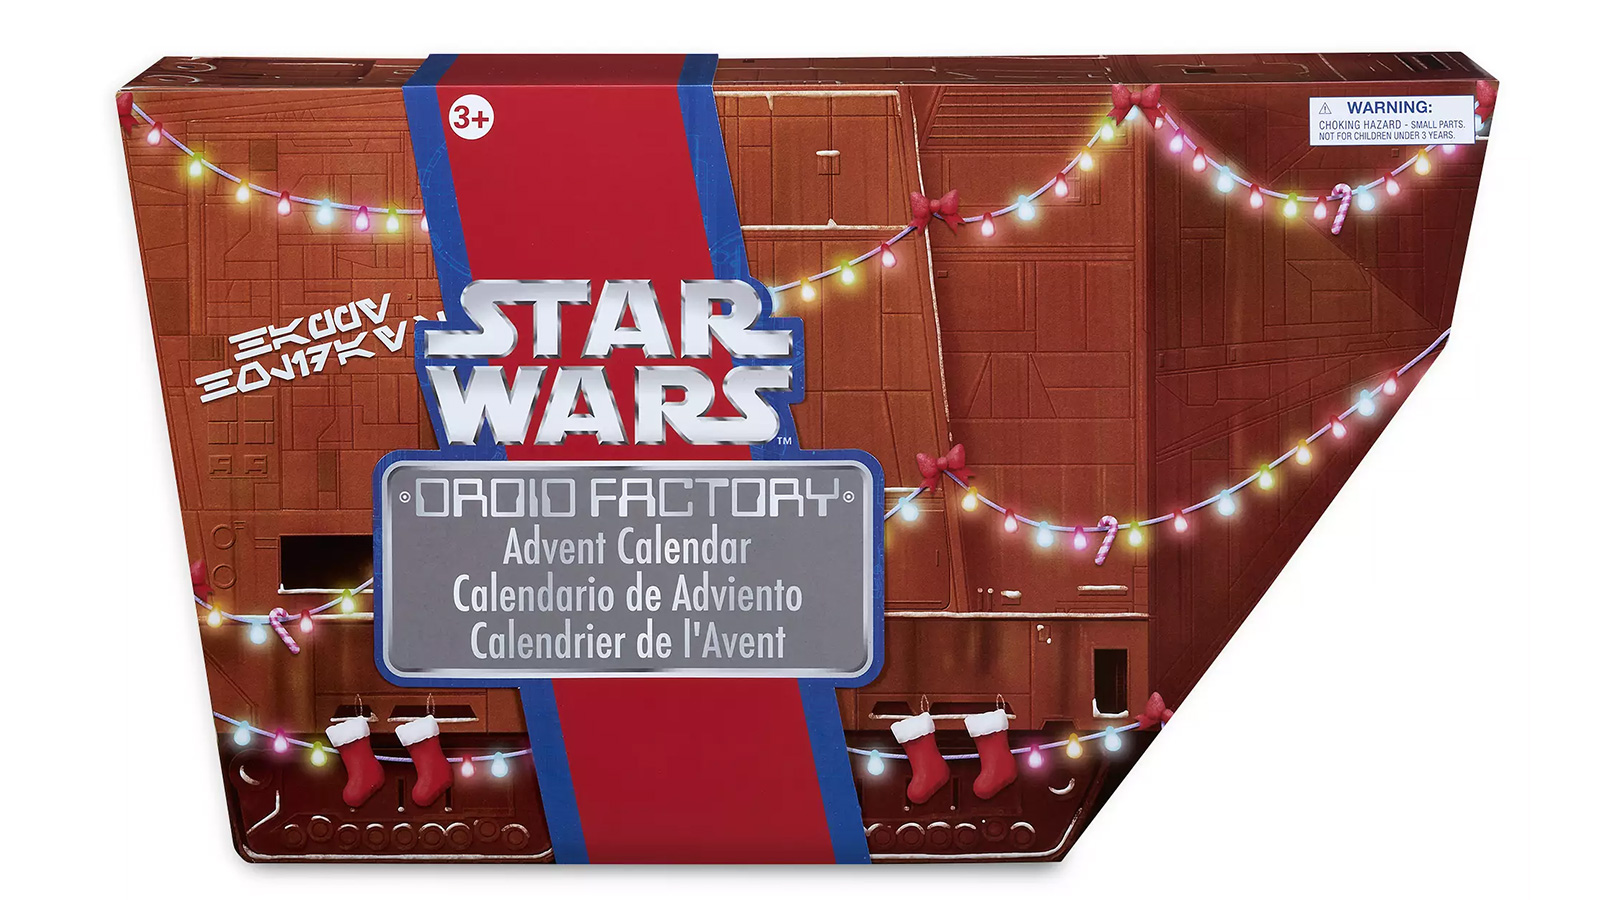 In Stock At Shop Disney Exclusive Droid Factory Advent Calendar That